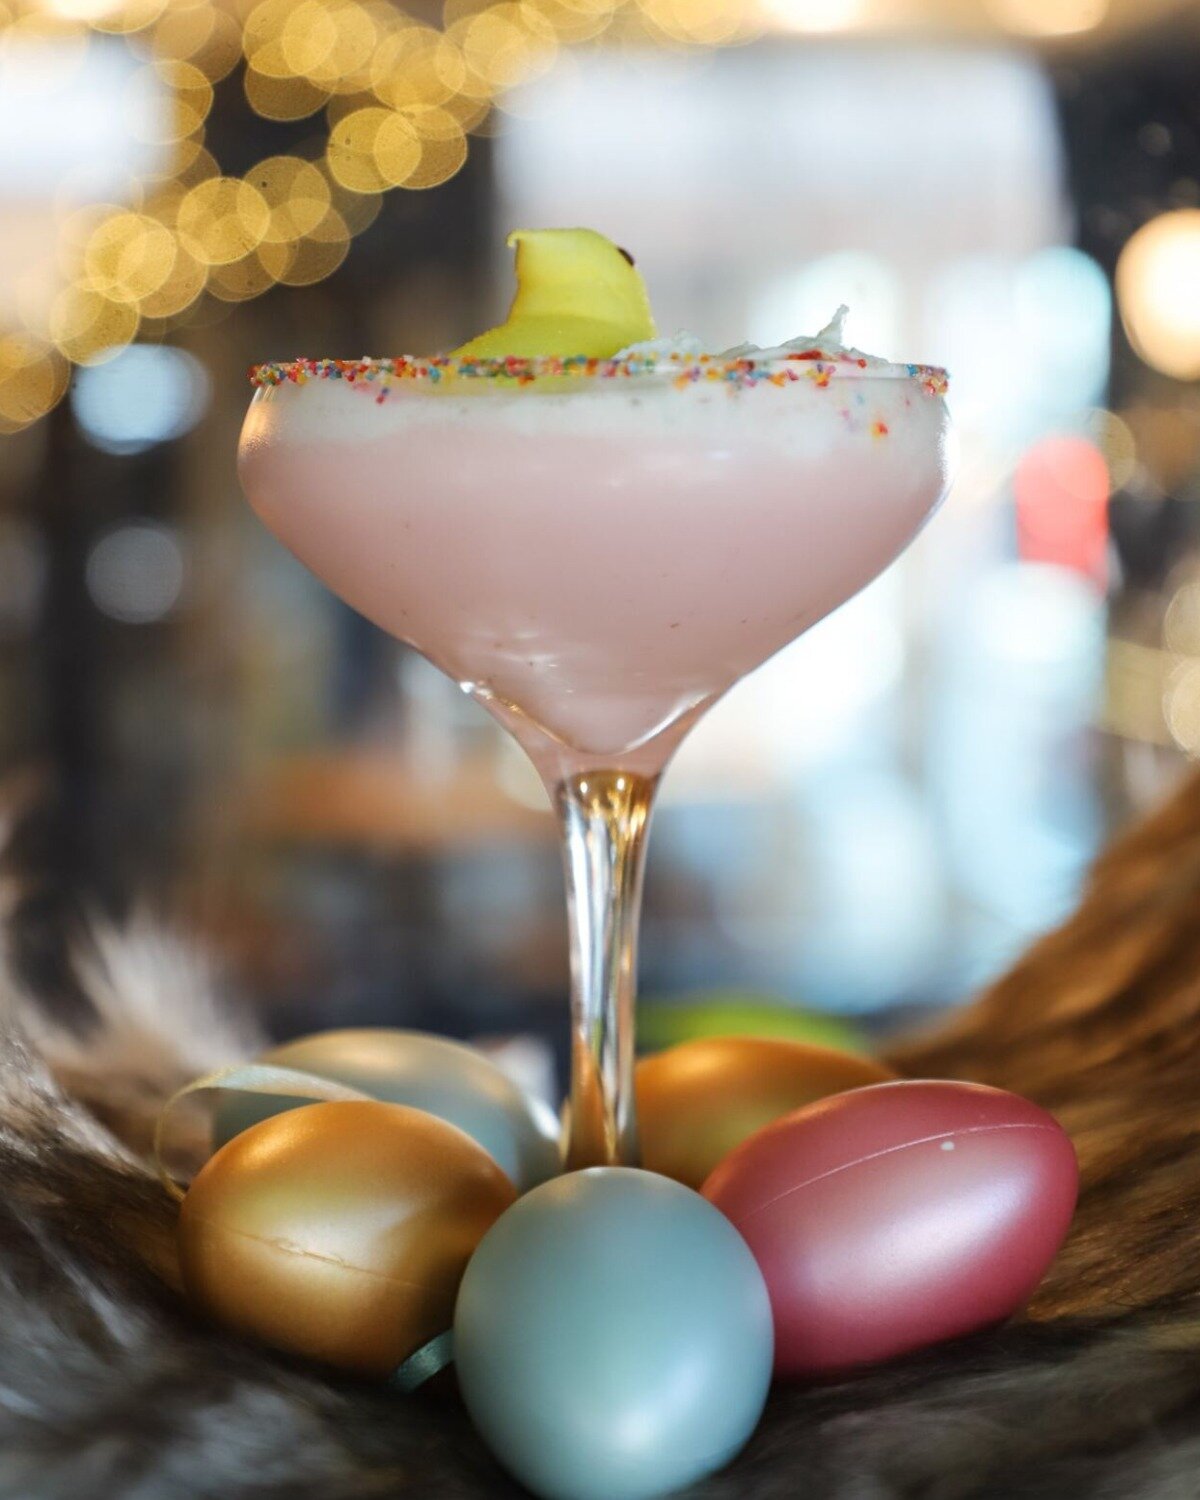 Introducing: The Peep Show 🐥 🌟  The wait is almost over, our limited-edition Easter cocktail is available on 3/30 &amp; 3/31. Featuring our MainStage Vodka and topped with a peep, mark your calendars to try it yourself! 💐 ☀️ #ThinkingTreeSpirits #